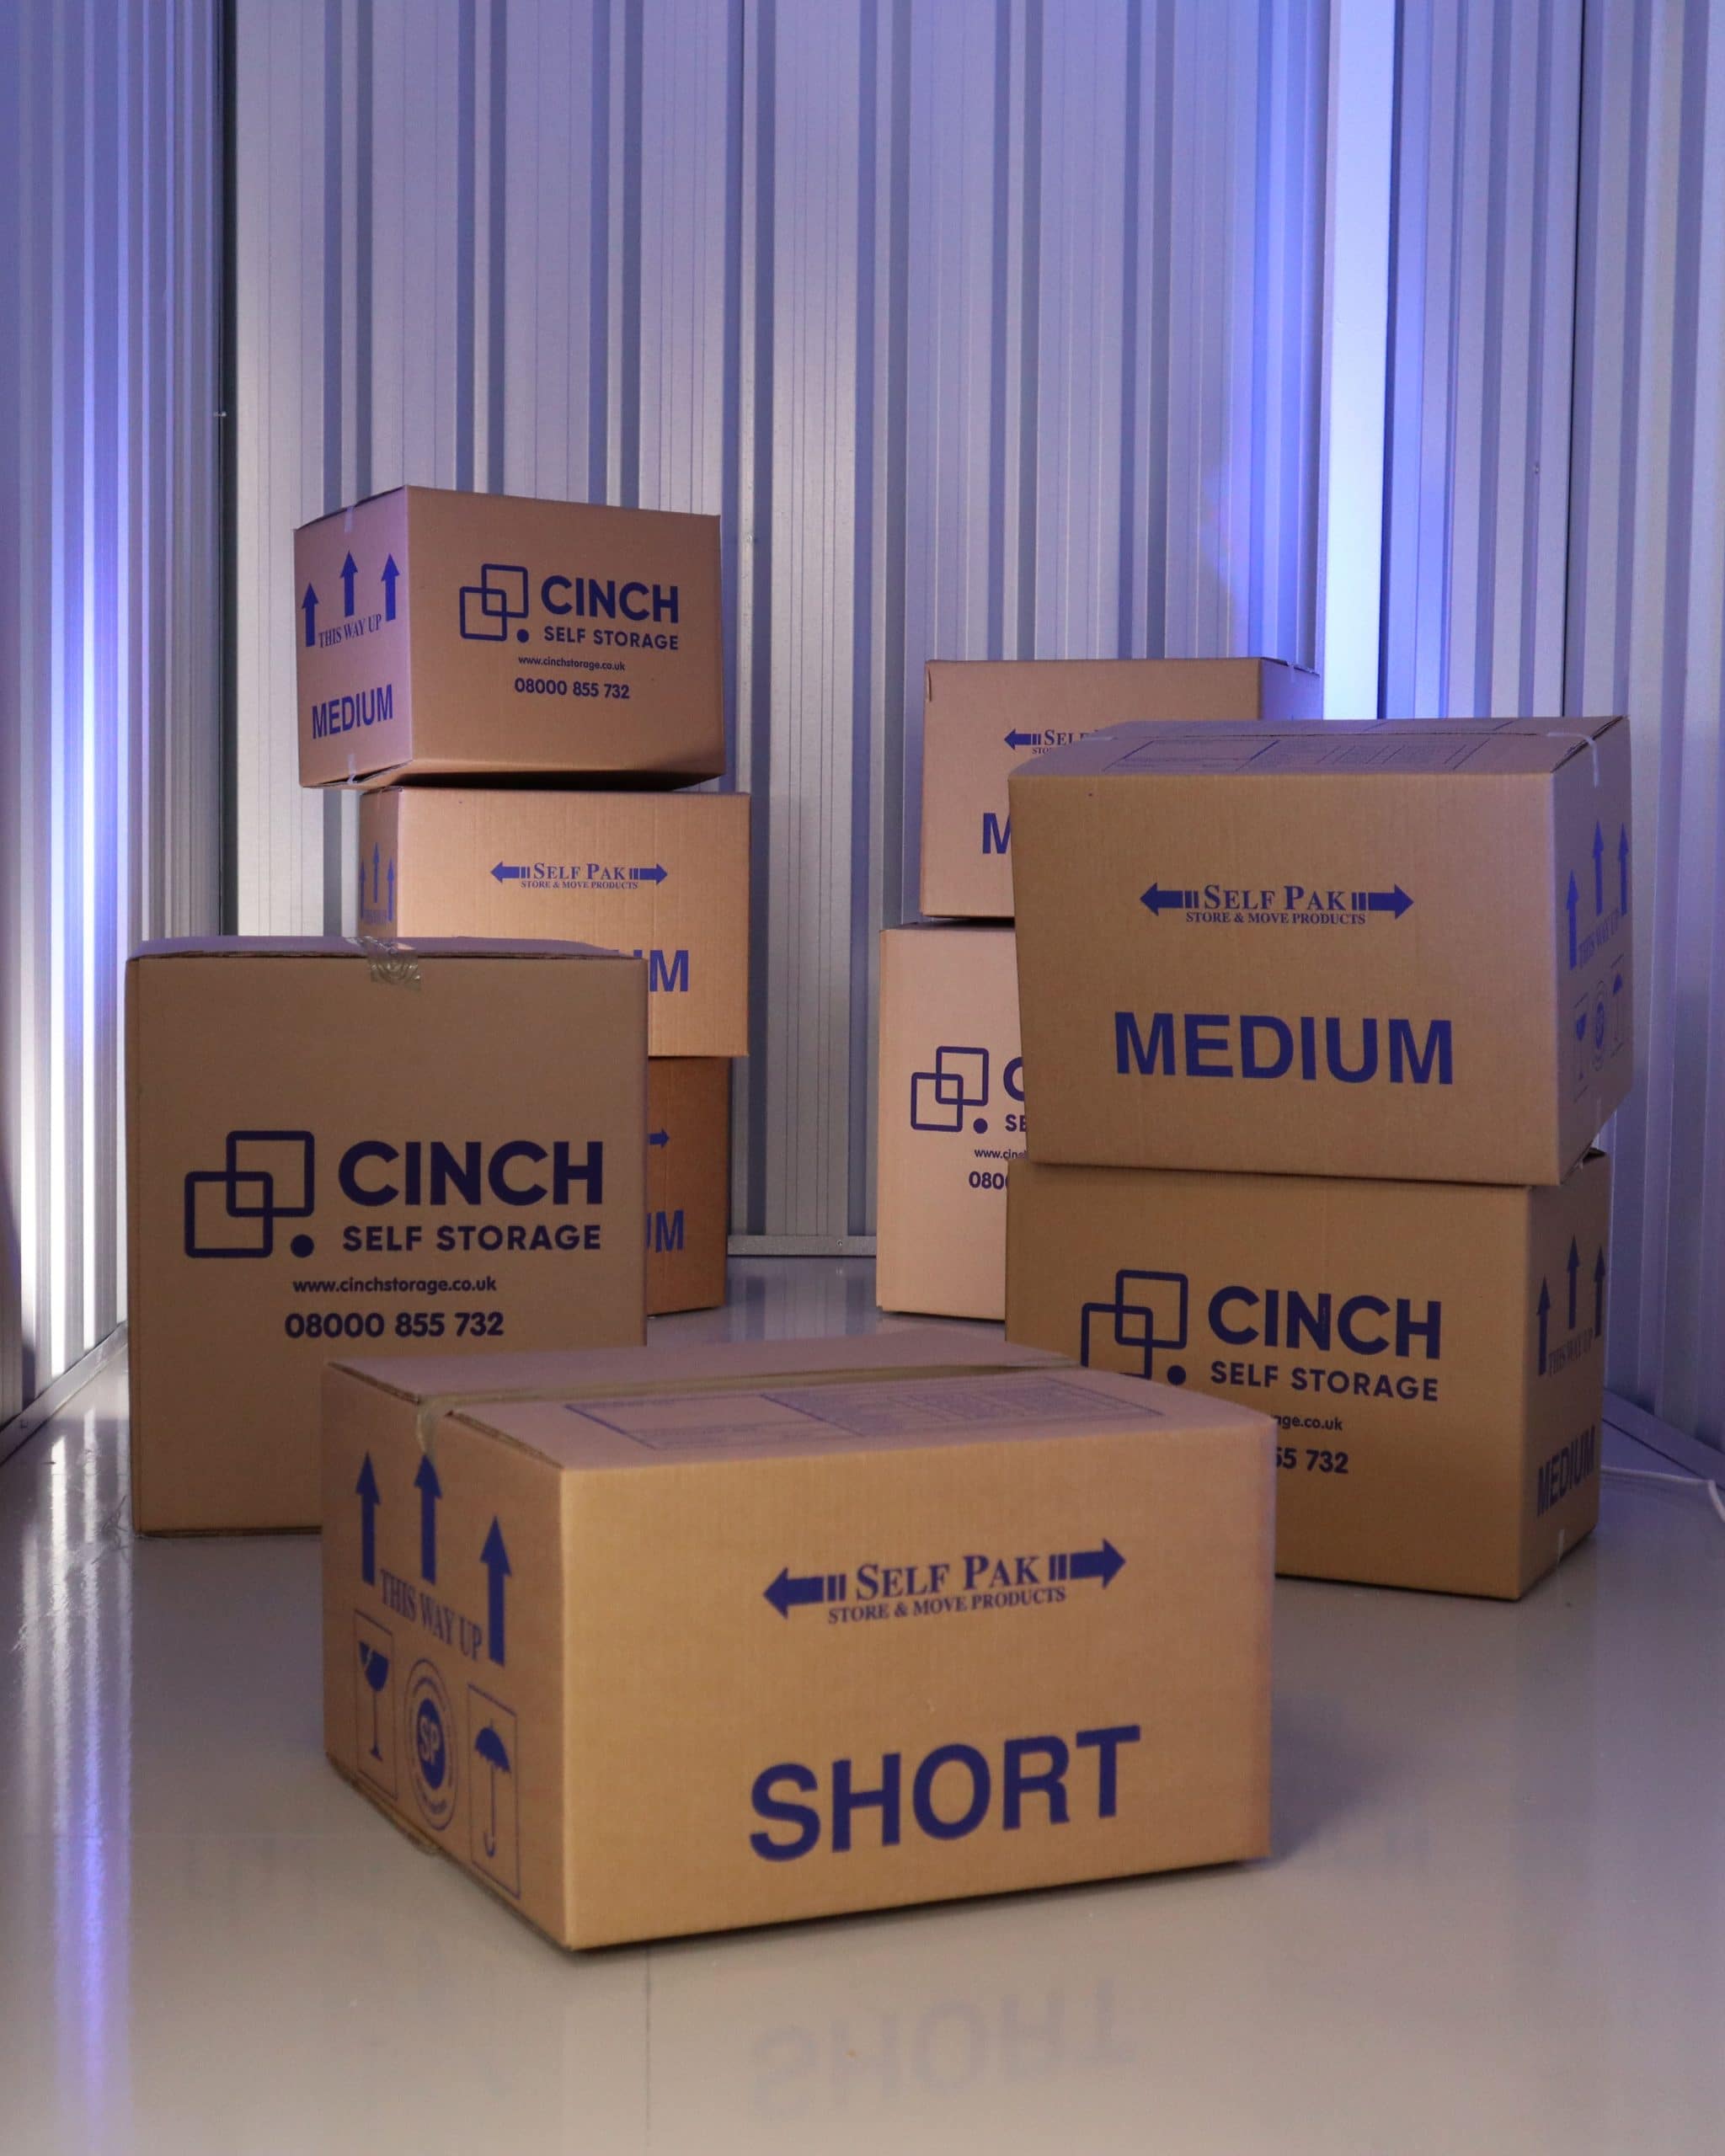 A variety of box sizes stacked inside a Cinch storage unit